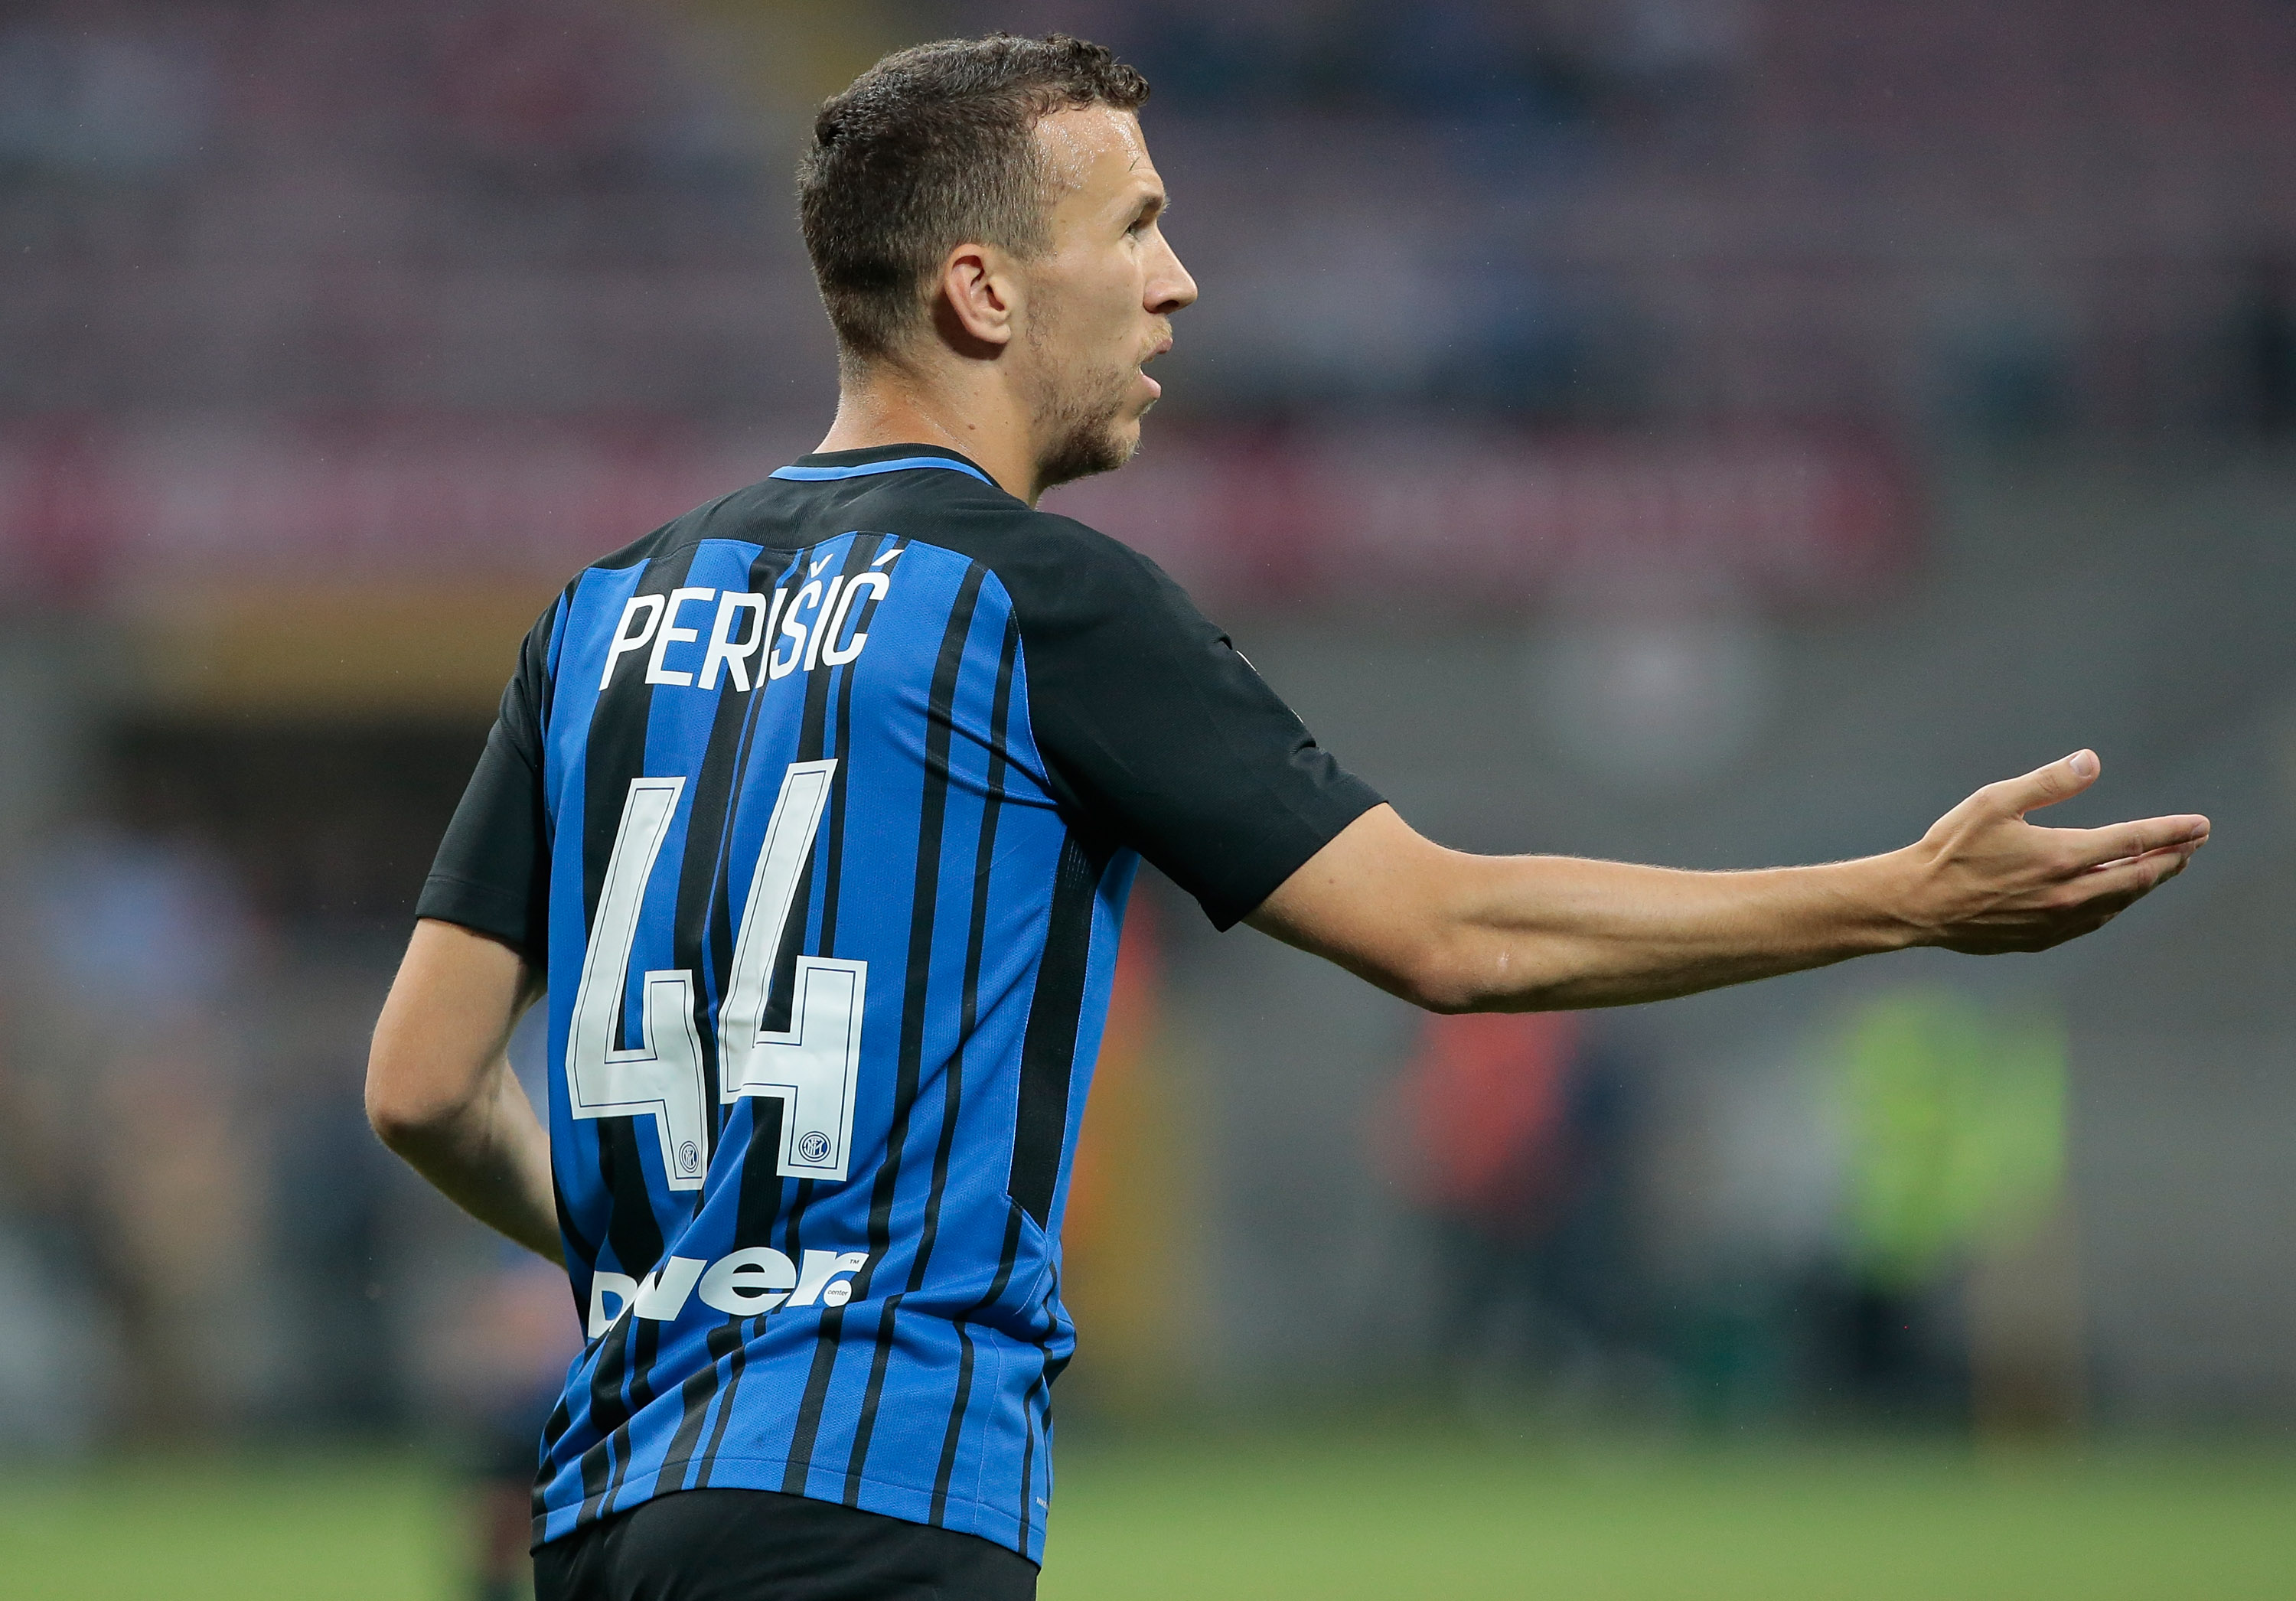 MILAN, ITALY - MAY 28: Ivan Perisic of FC Internazionale Milano gestures during the Serie A match between FC Internazionale and Udinese Calcio at Stadio Giuseppe Meazza on May 28, 2017 in Milan, Italy. (Photo by Emilio Andreoli/Getty Images)